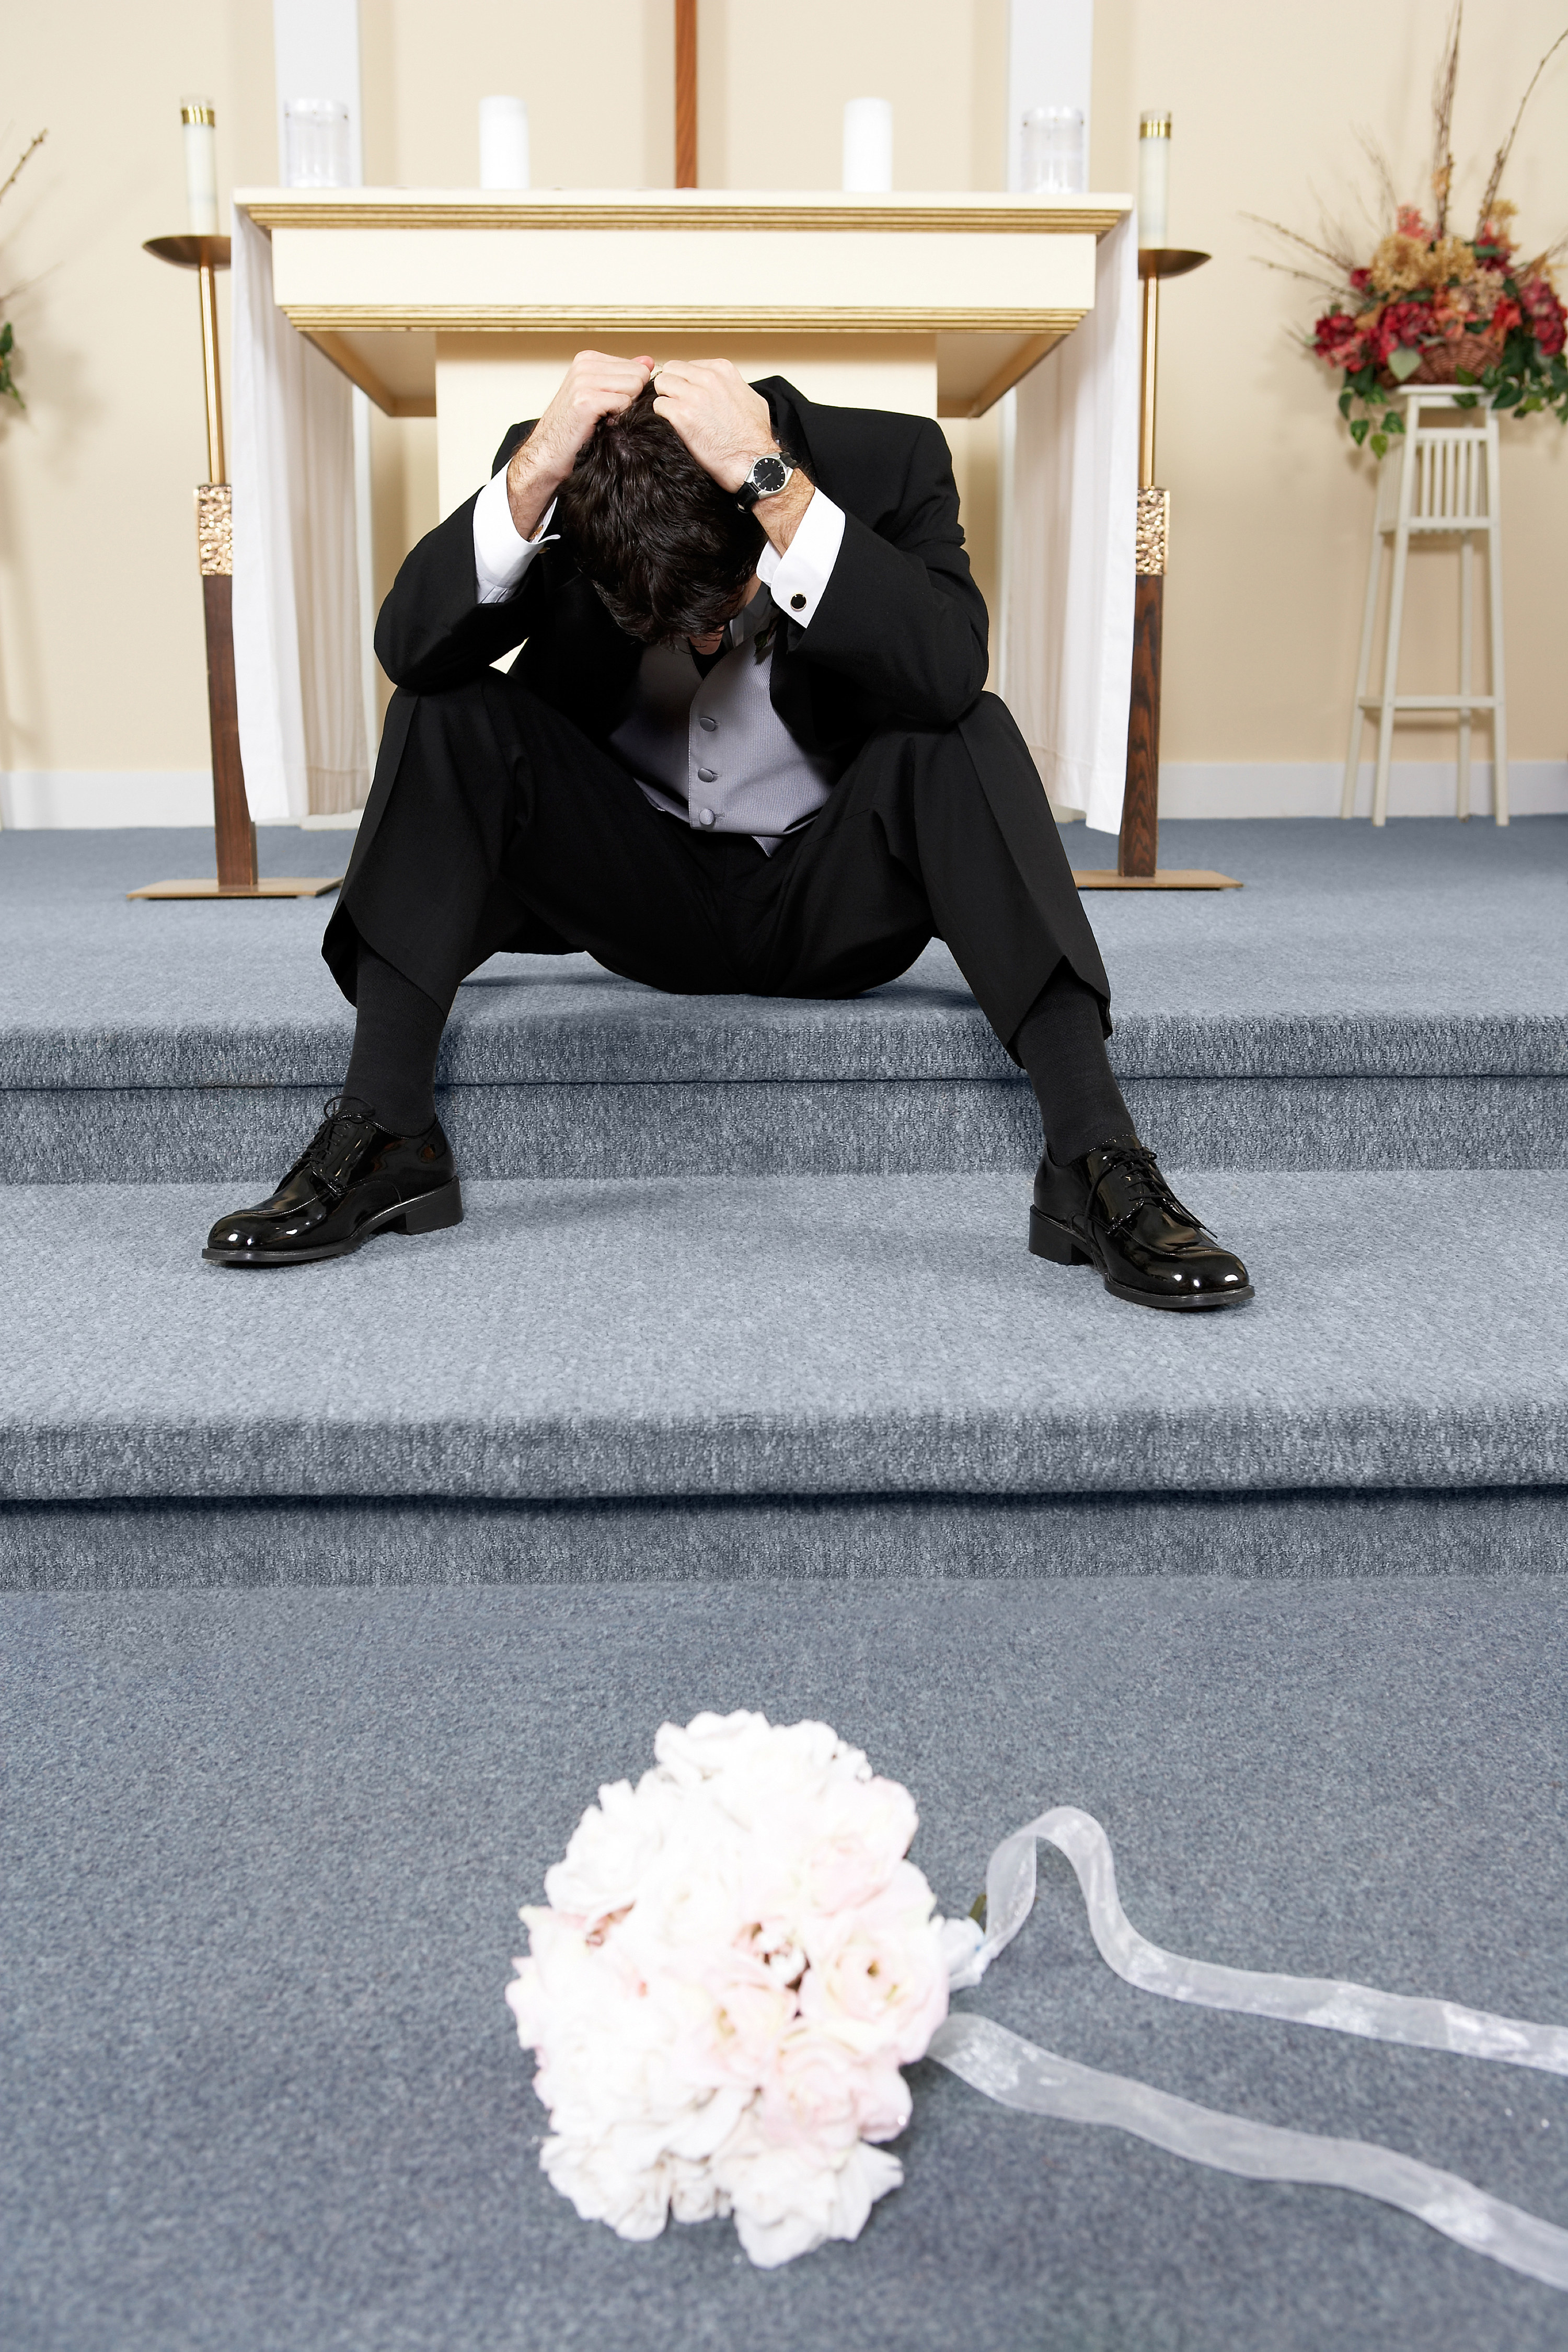 groom crying with bridal bouquet on ground